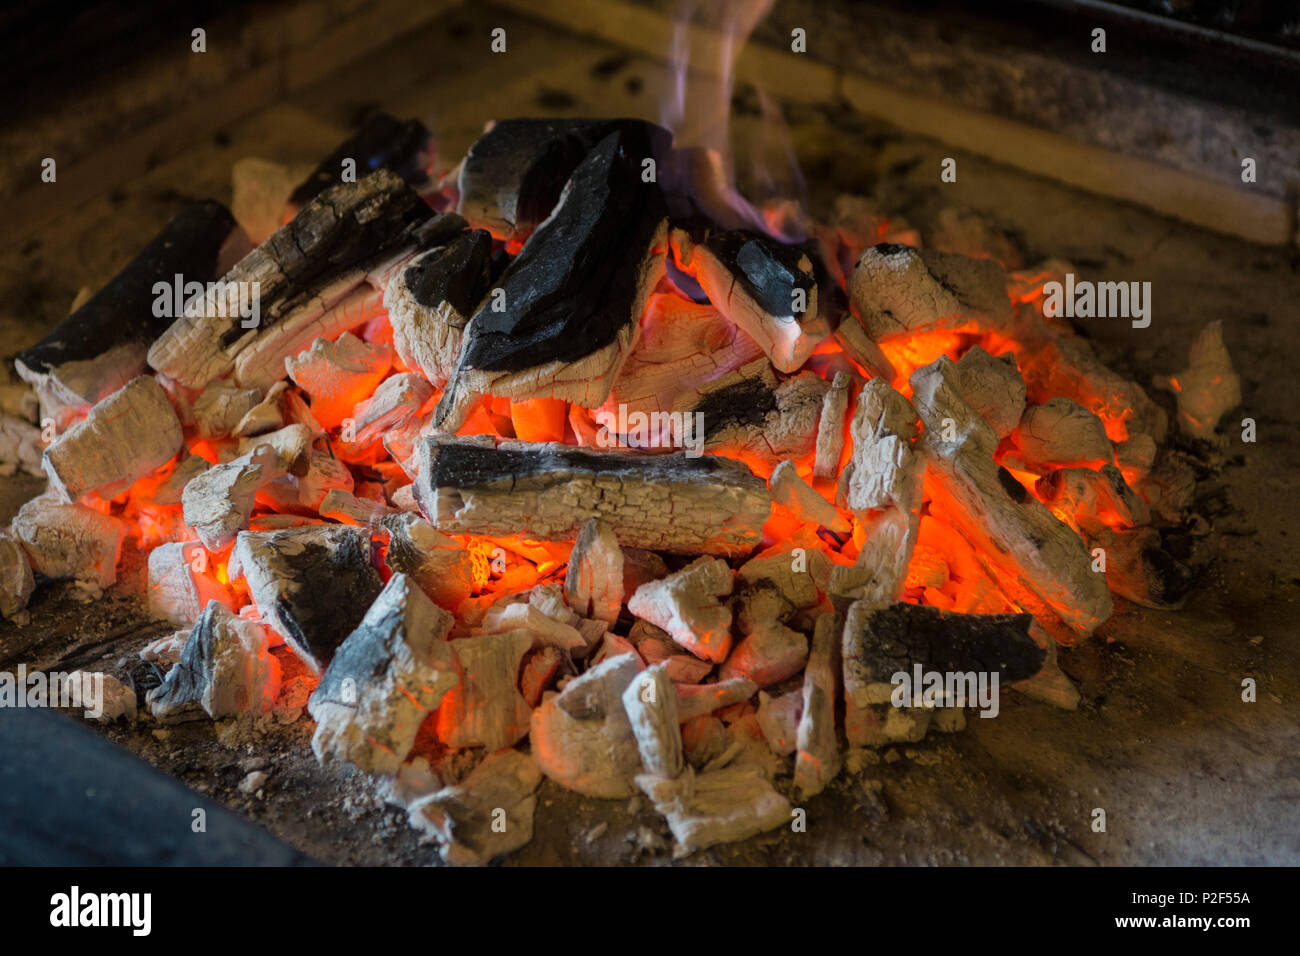 Open fire in the fireplace, Wood, Fire, Warmth Stock Photo